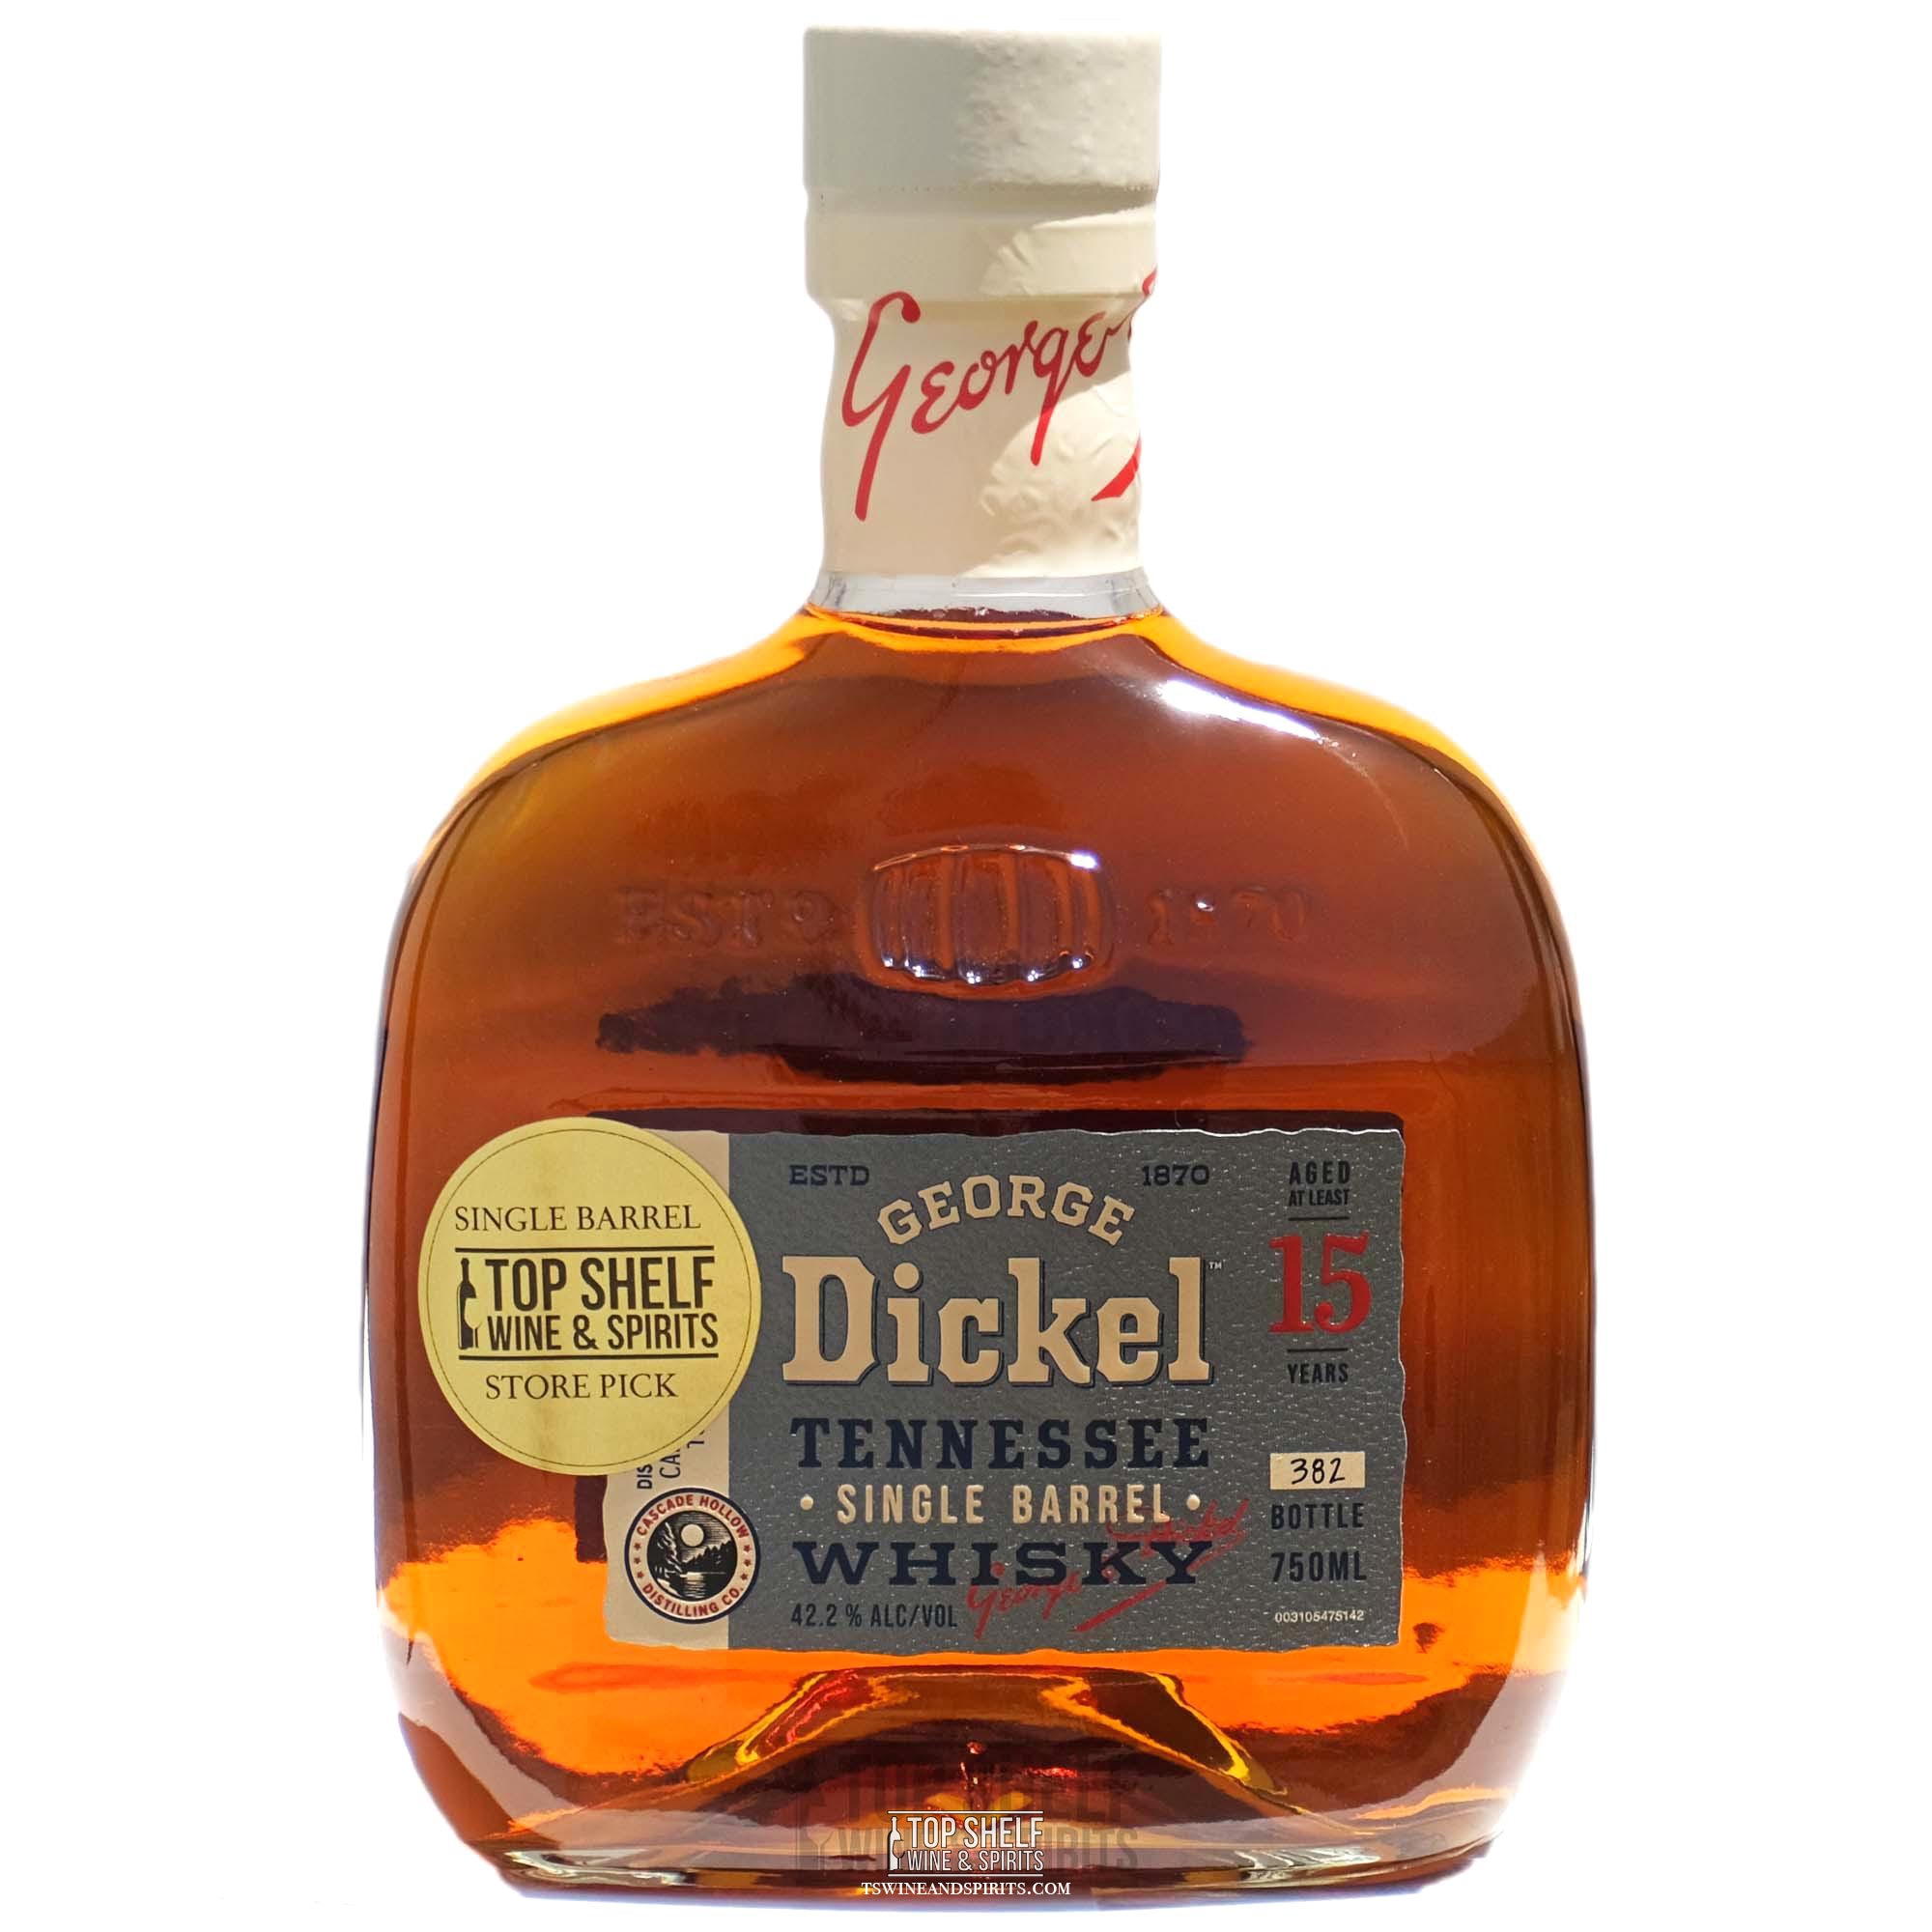 George Dickel Tennessee Whiskey 84.4 Proof 15 Year Single Barrel (Private Selection #3)